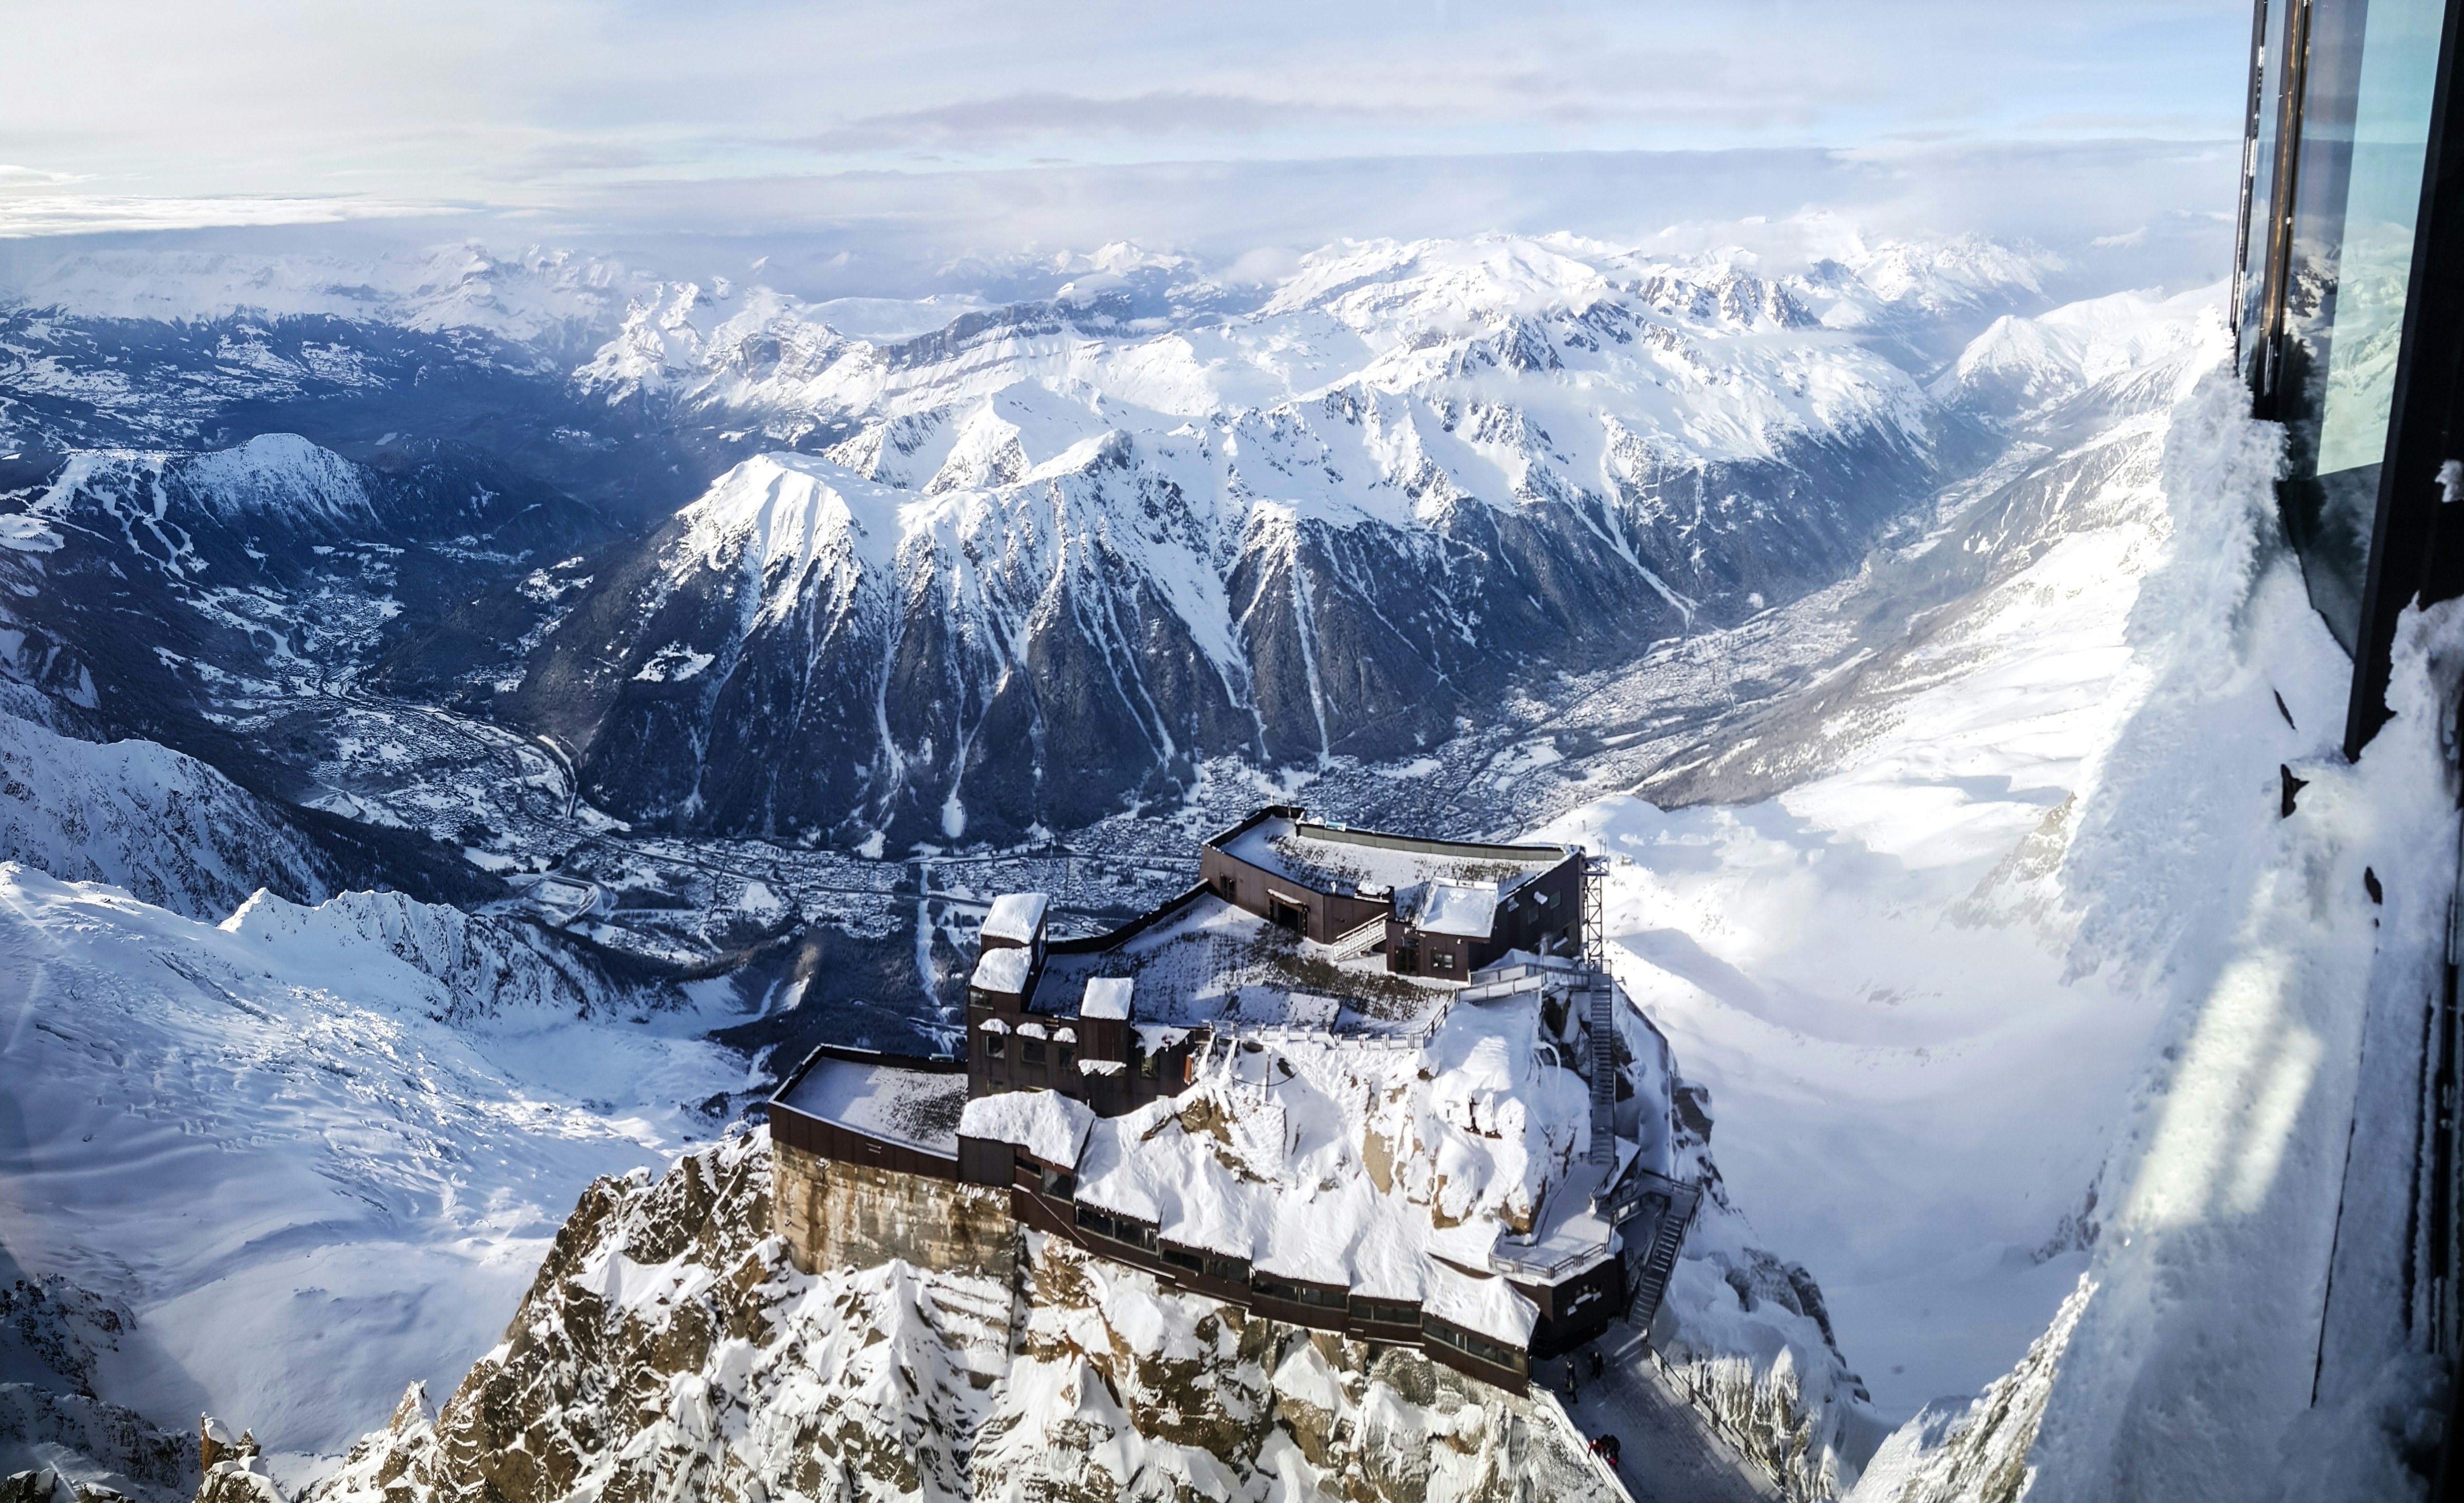 A view from Aiguille du Midi on French Alps